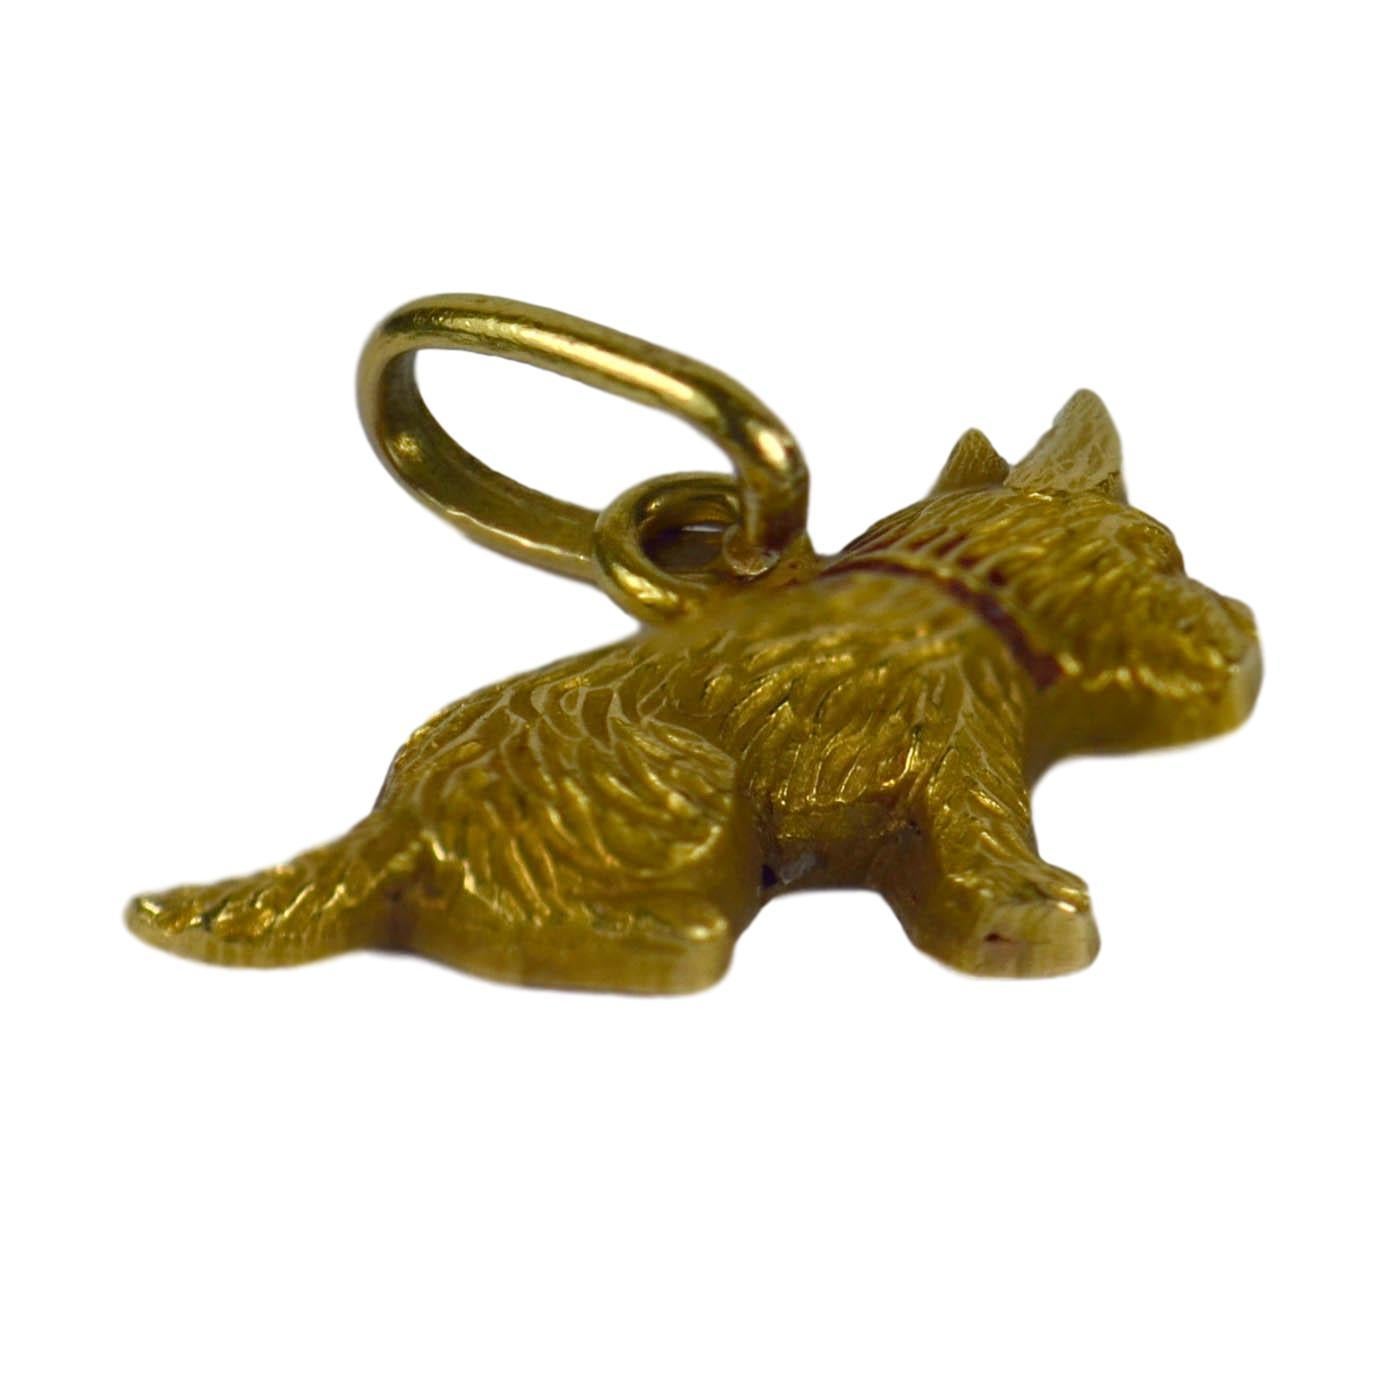 An 18 karat yellow gold charm pendant designed as a small dog with a red enamel collar. Some wear to the enamel. Unmarked but tested as 18k.

Dimensions: 1.3 x 1.5 x 0.2 cm
Weight: 0.42 grams